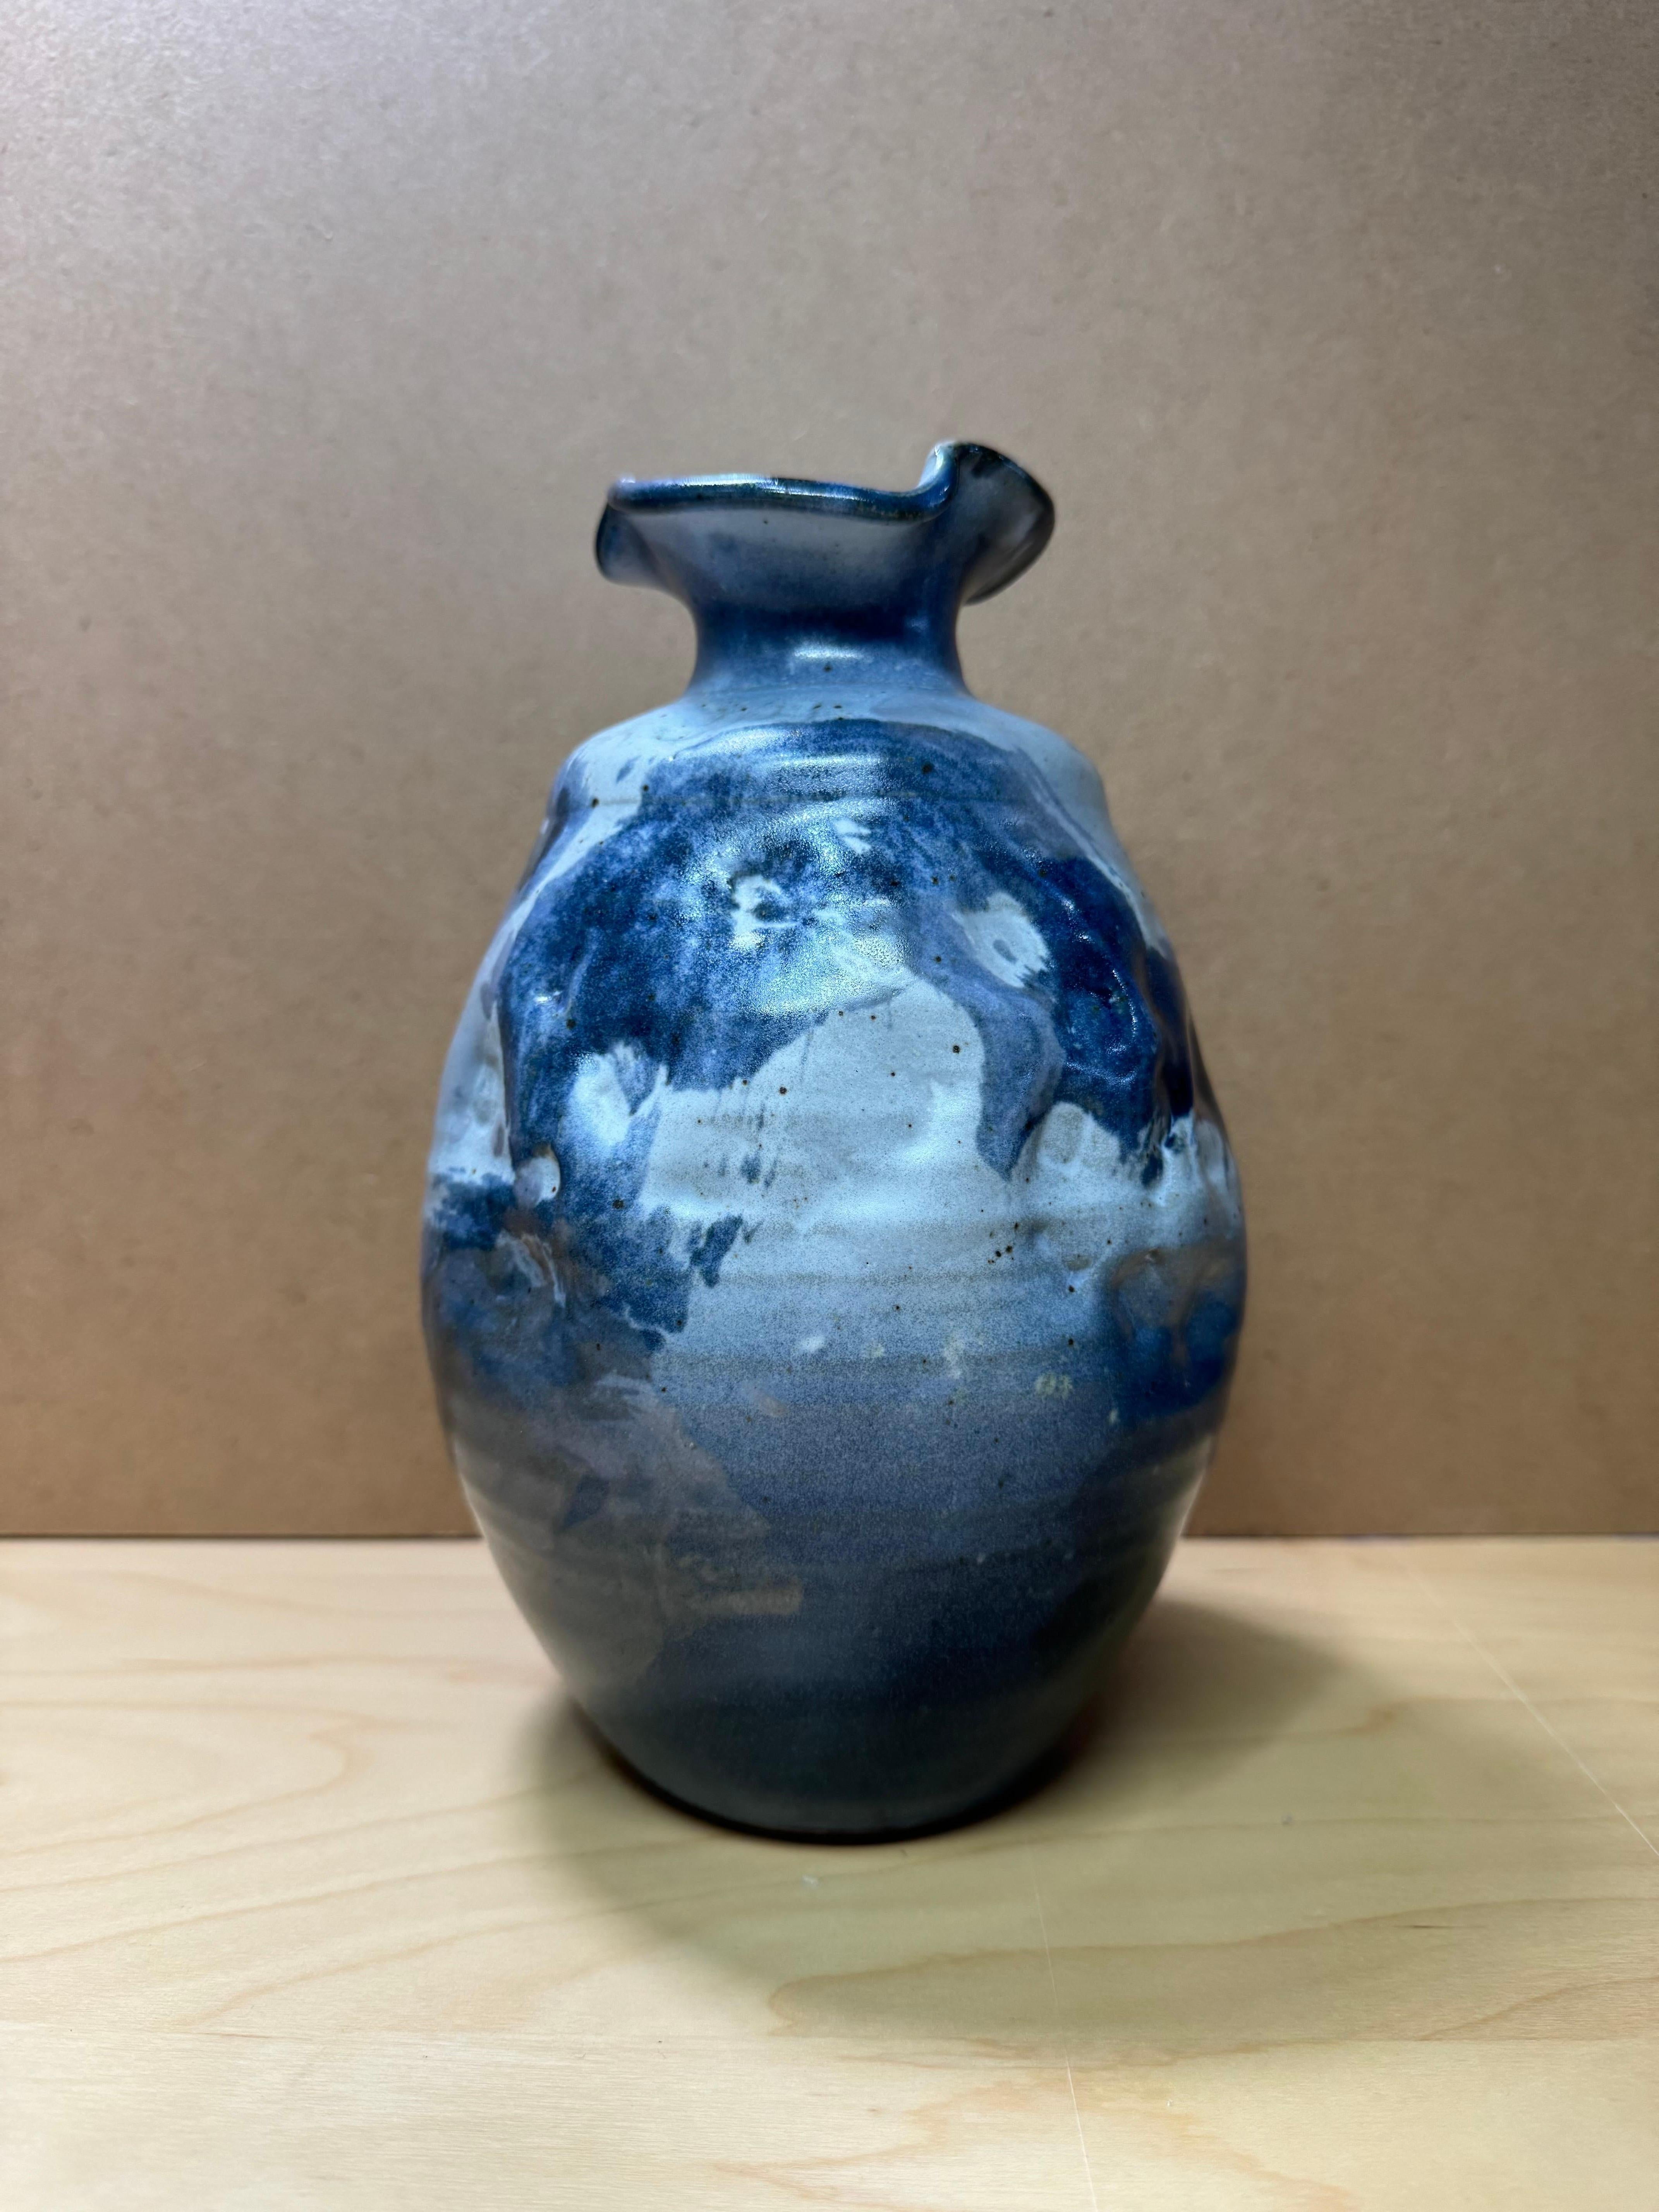 Beautiful hand thrown pottery vase with fluted and ruffled rim and uneven body. Finished with different shades of blue, this vase is a stunner and eye-catcher that will draw attention wherever displayed.
This vase is signed 